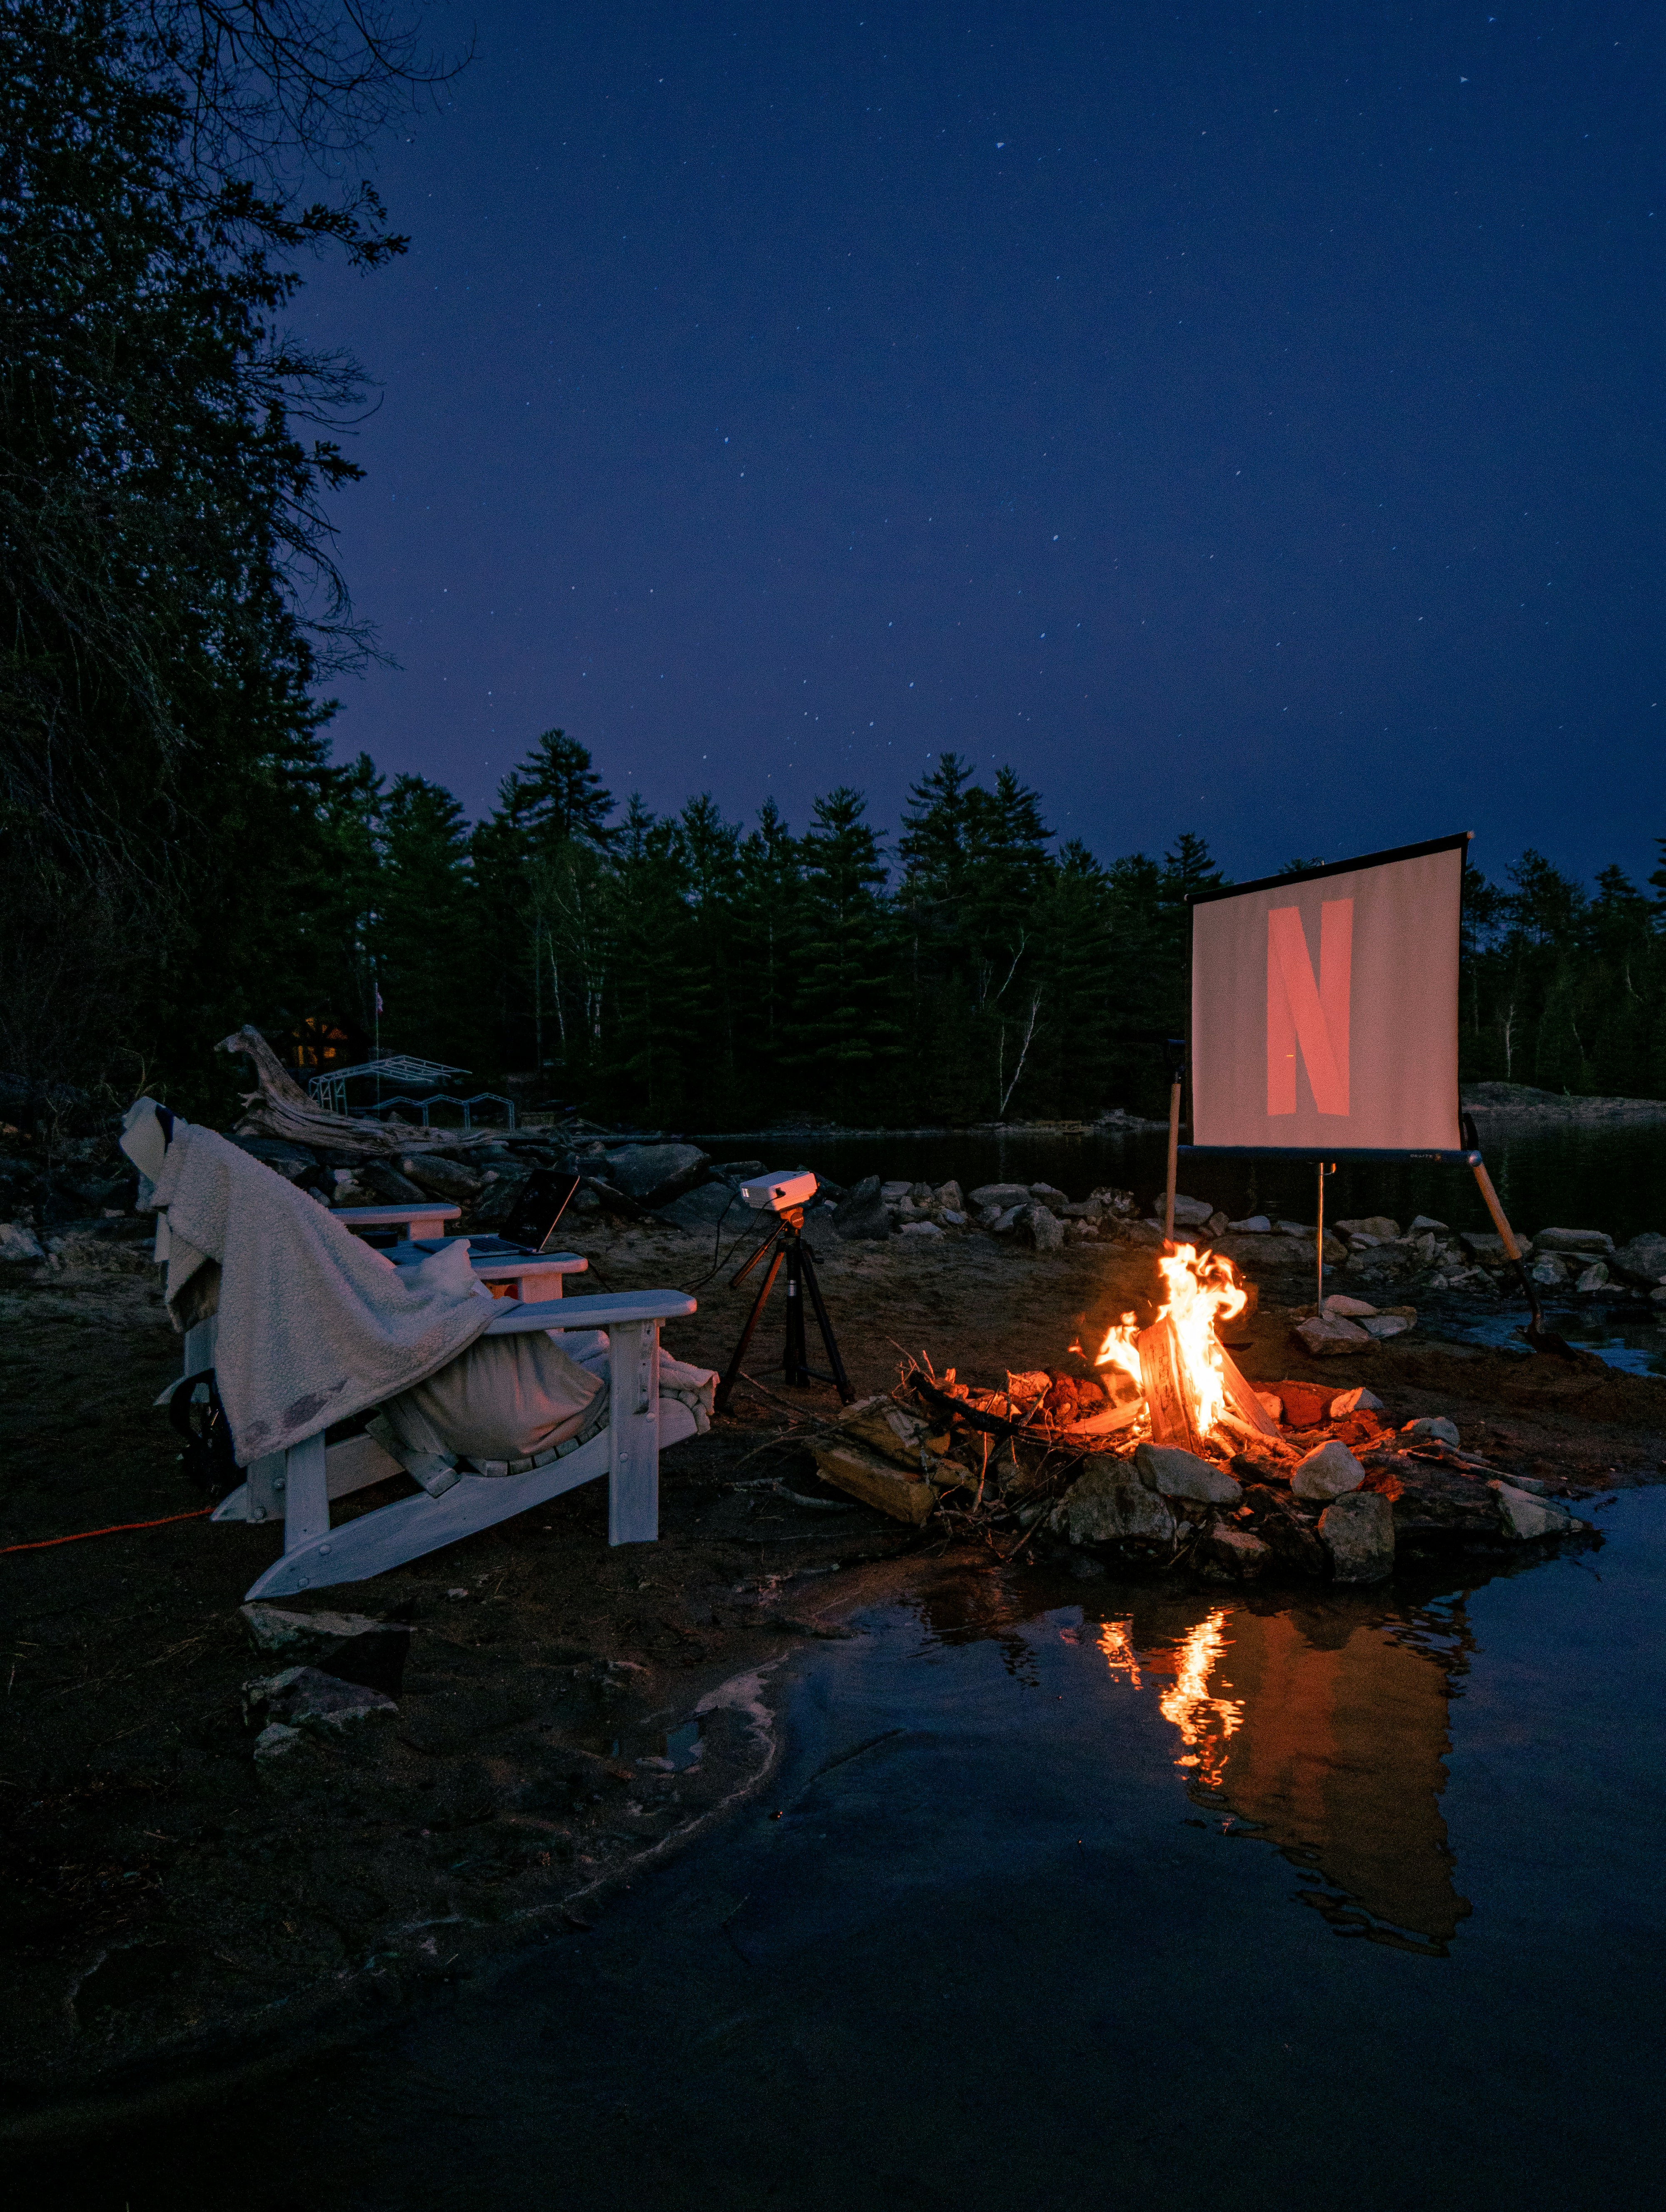 A cozy night under the stars on the beach of a lake watching a movie